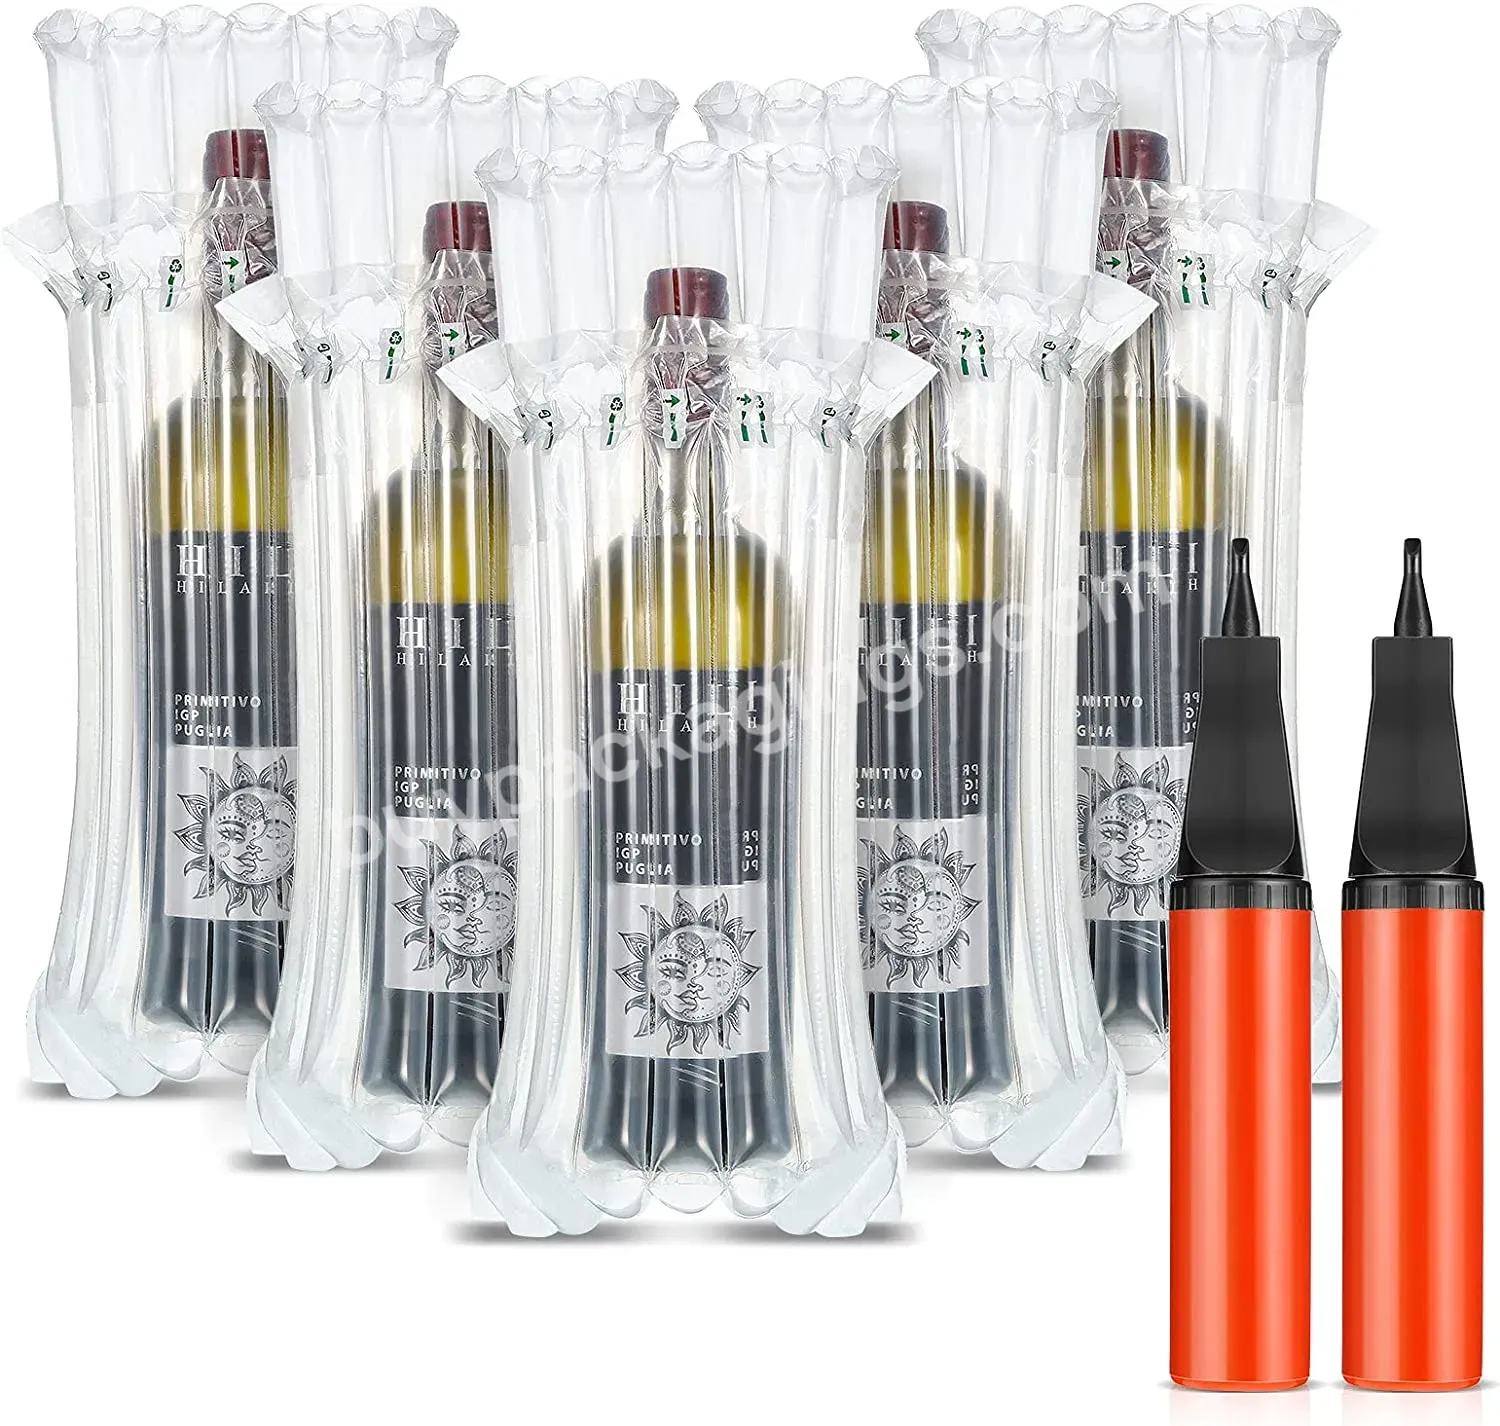 Wine Bottle Protector Bags Bubble Cushion Wrap Airplane Travel,Safety Shipping Packaging Bags For Glass Bottles In Transport - Buy Air Bags,Air Column Bags Packaging,Inflatable Air Column Bag.